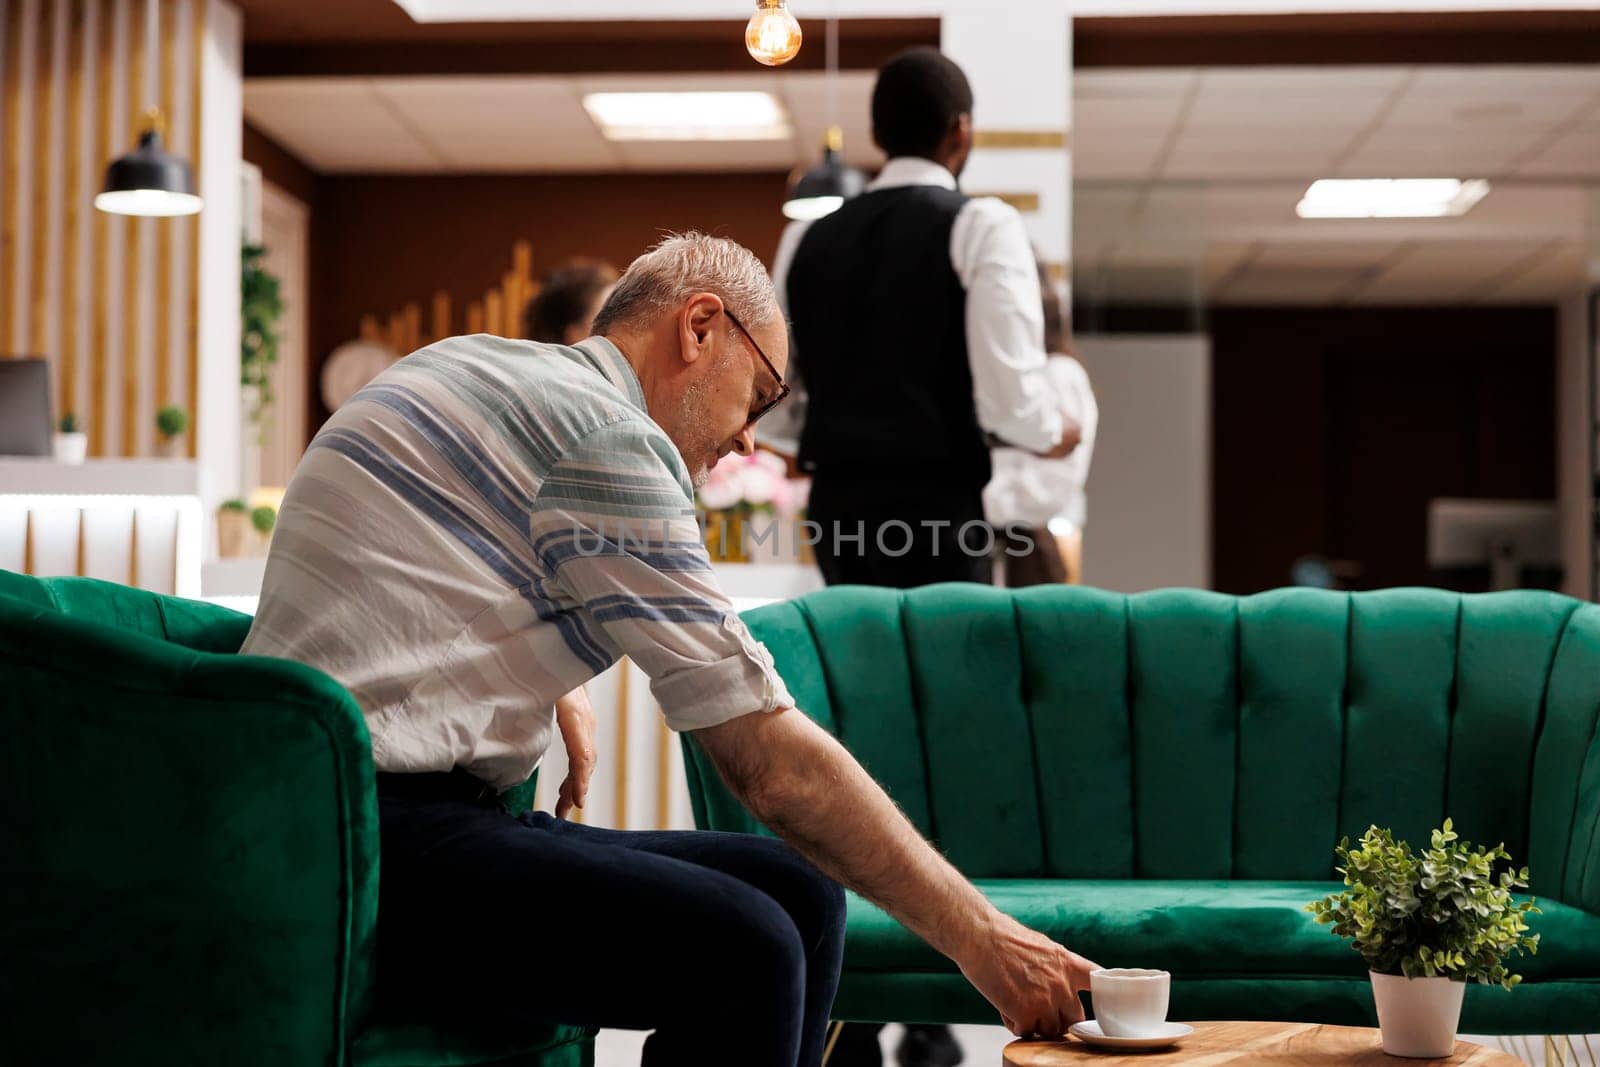 At elegant lounge area for check-in, elderly caucasian man sits on sofa reaching for cup of coffee on table. Senior guy in hotel lobby, waiting on the couch for the booking procedure.